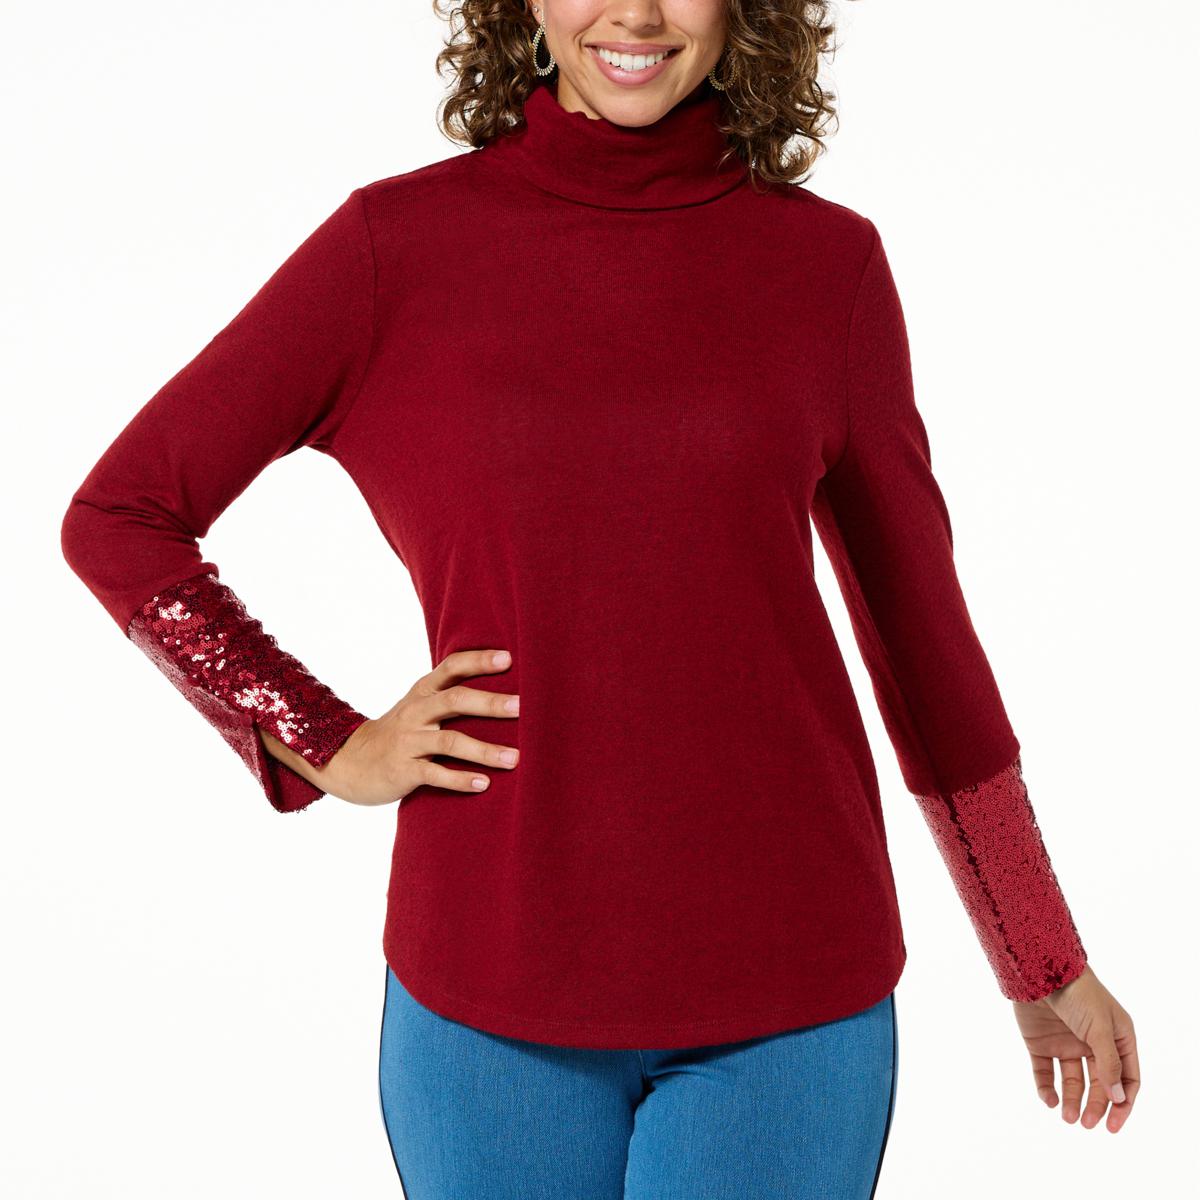 DG2 by Diane Gilman Brushed Knit Sequin Cuff Turtleneck Sweater